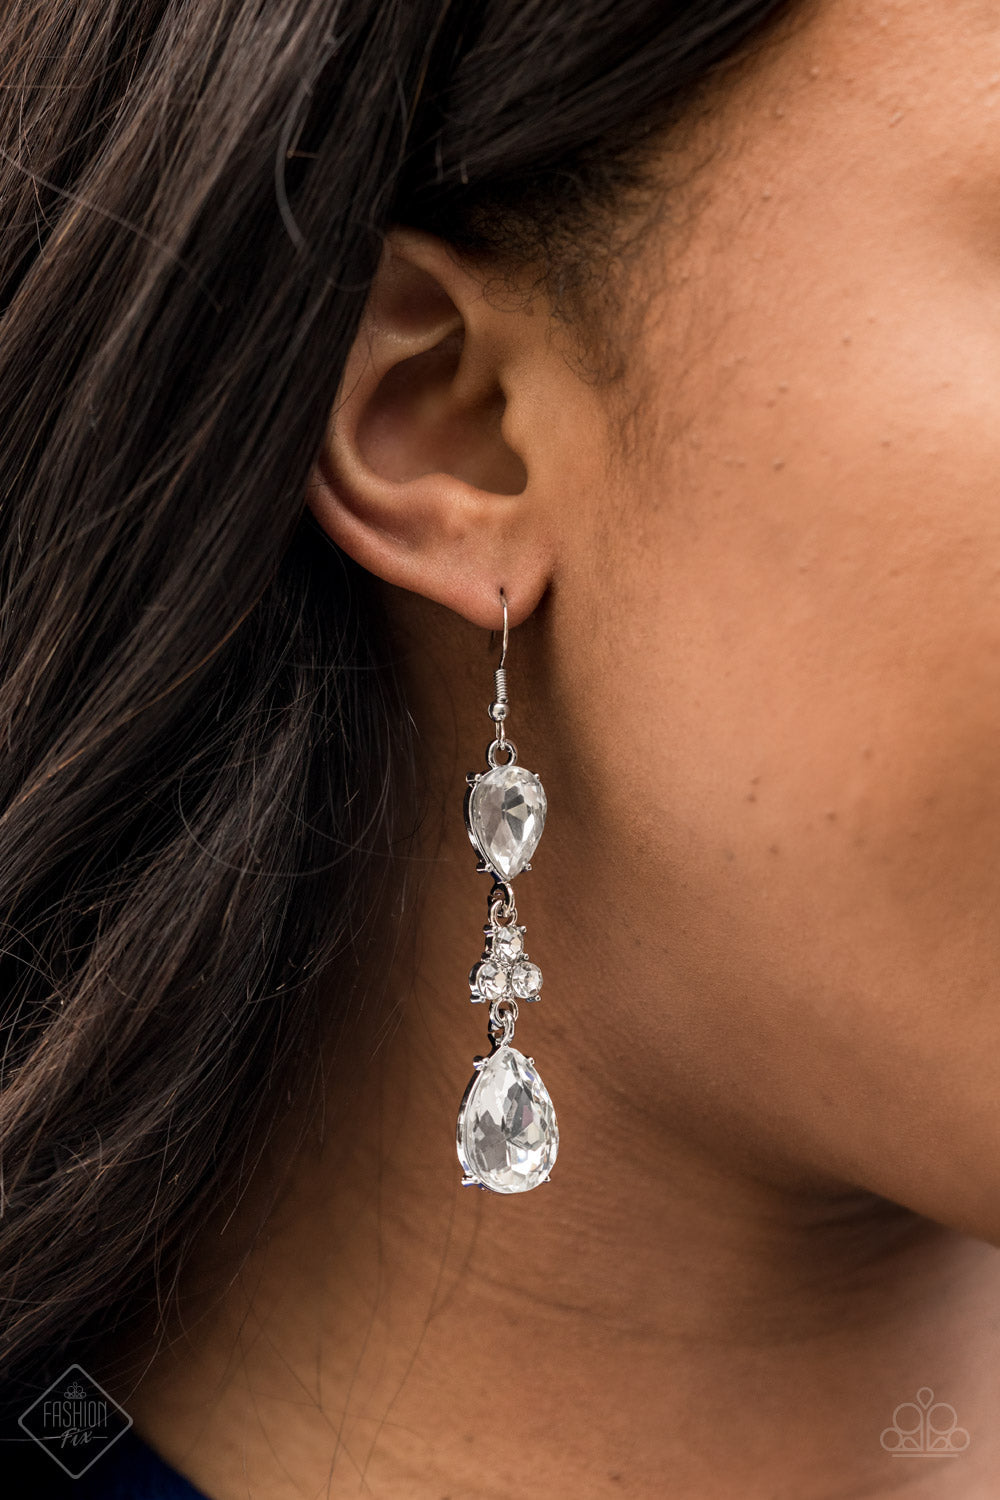 Once Upon a Twinkle - Silver Earrings - Paparazzi Accessories - A trio of dazzling white rhinestones unites two white teardrop gems as they dangle brilliantly from the ear for a flawless finish. Earring attaches to a standard fishhook fitting. Sold as one pair of earrings.
